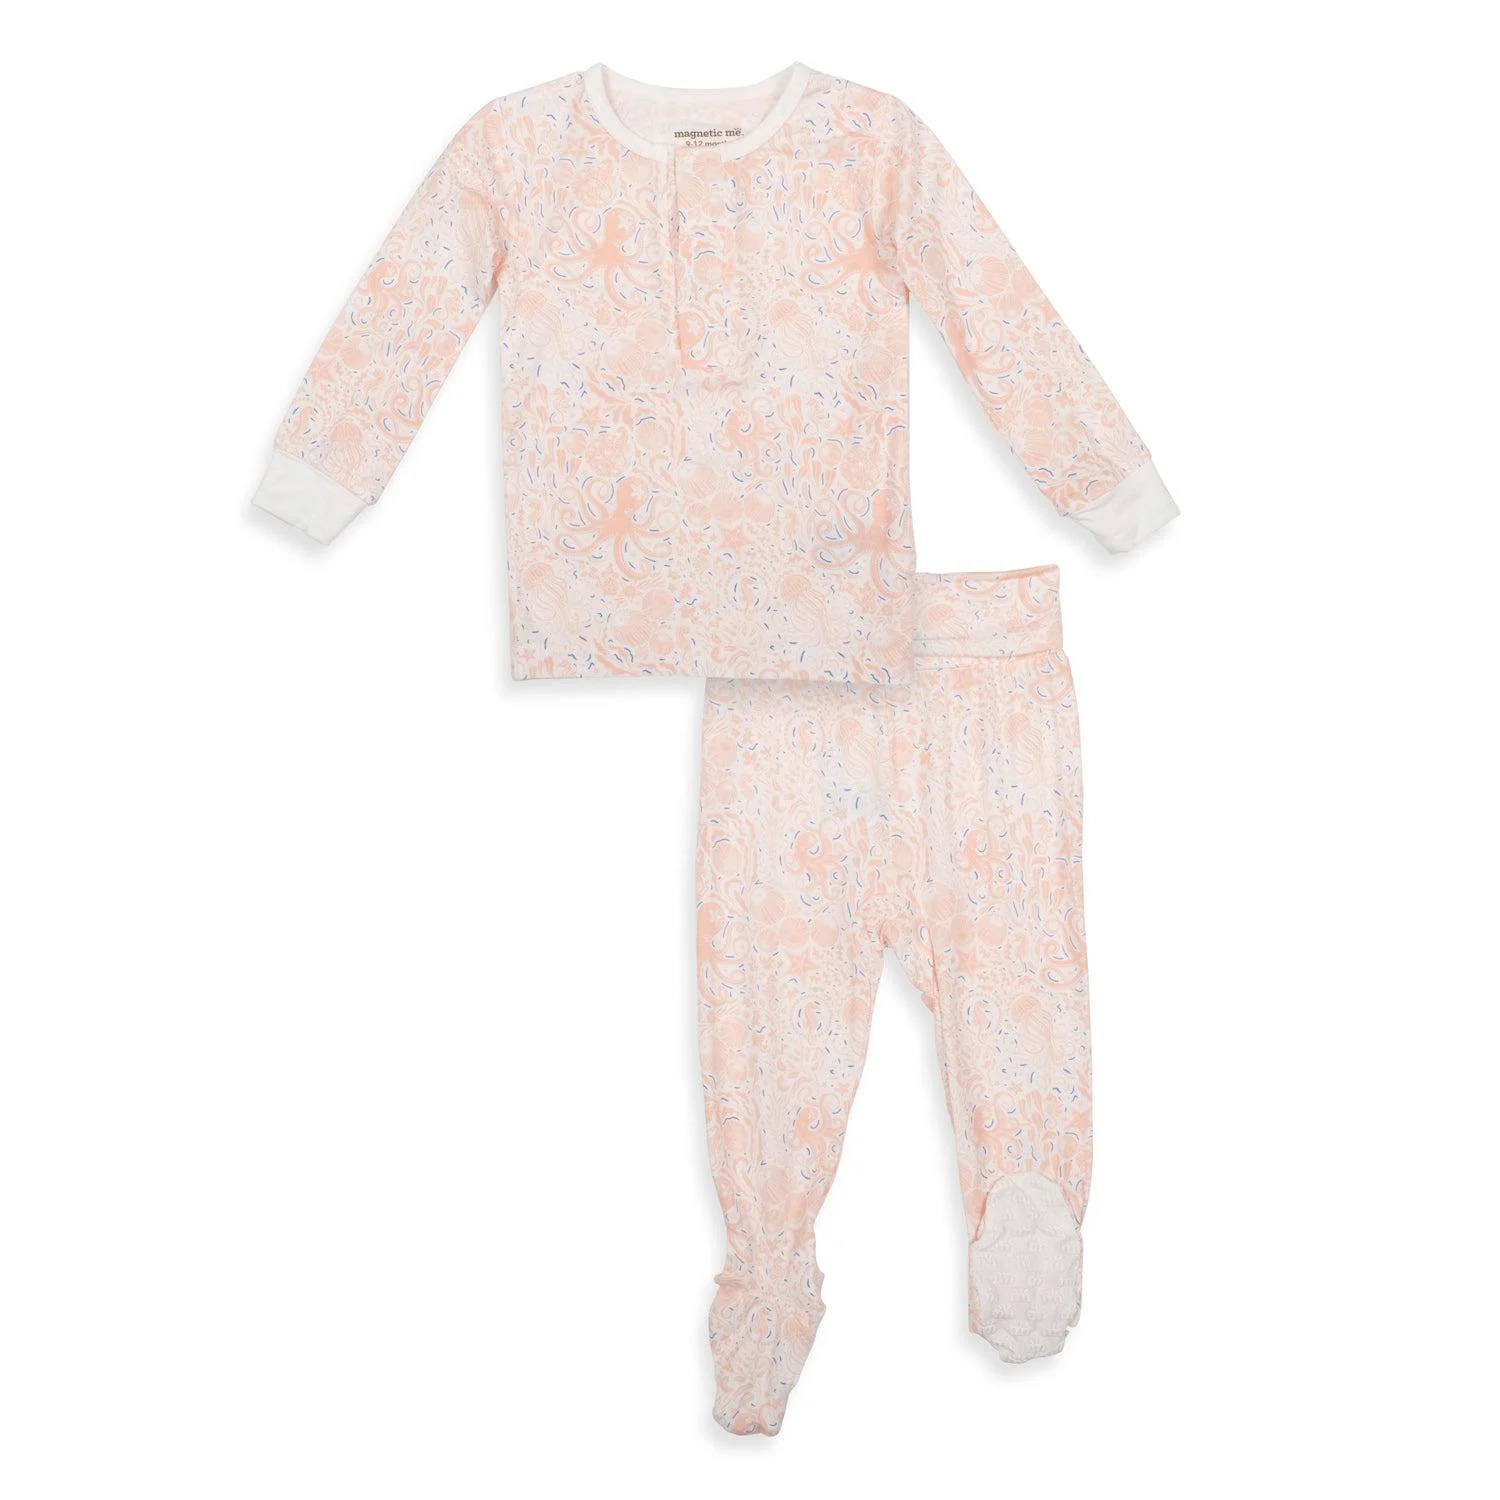 Magnetic Me Seas the Day Pink Modal Magnetic TwoTie Pajamas